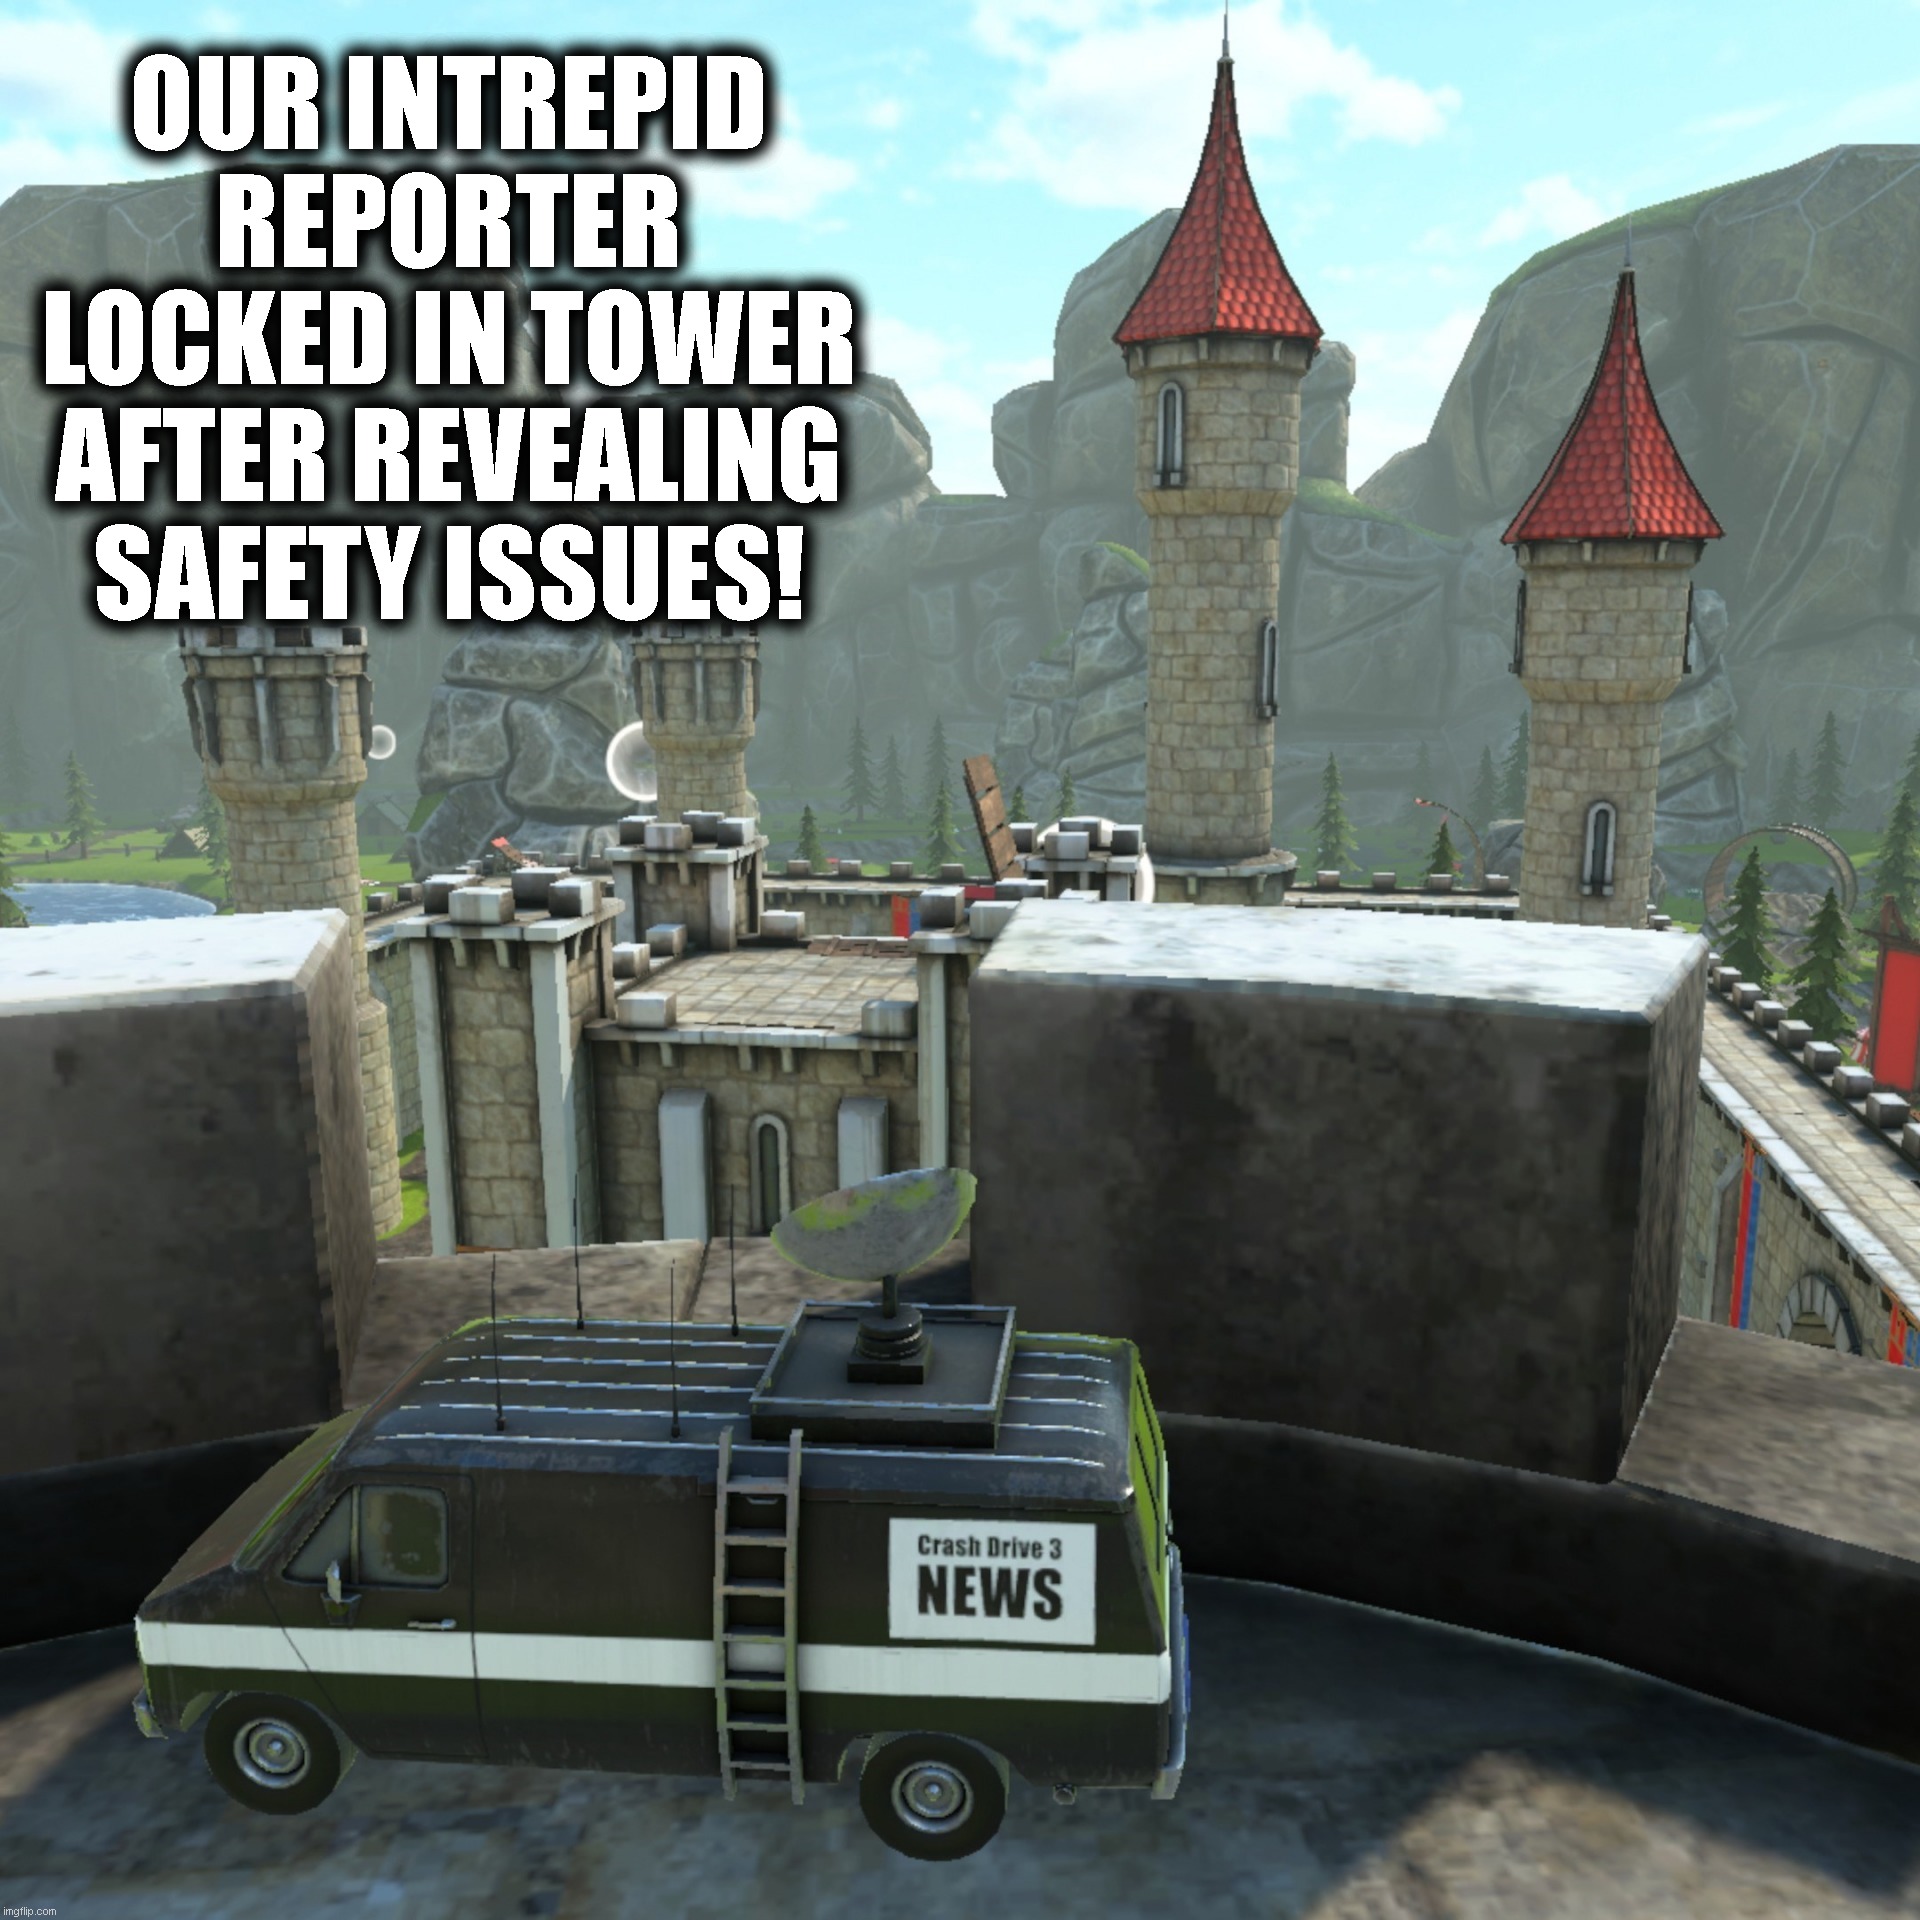 Reporter Detained! | OUR INTREPID REPORTER LOCKED IN TOWER AFTER REVEALING SAFETY ISSUES! | image tagged in news van in tower | made w/ Imgflip meme maker